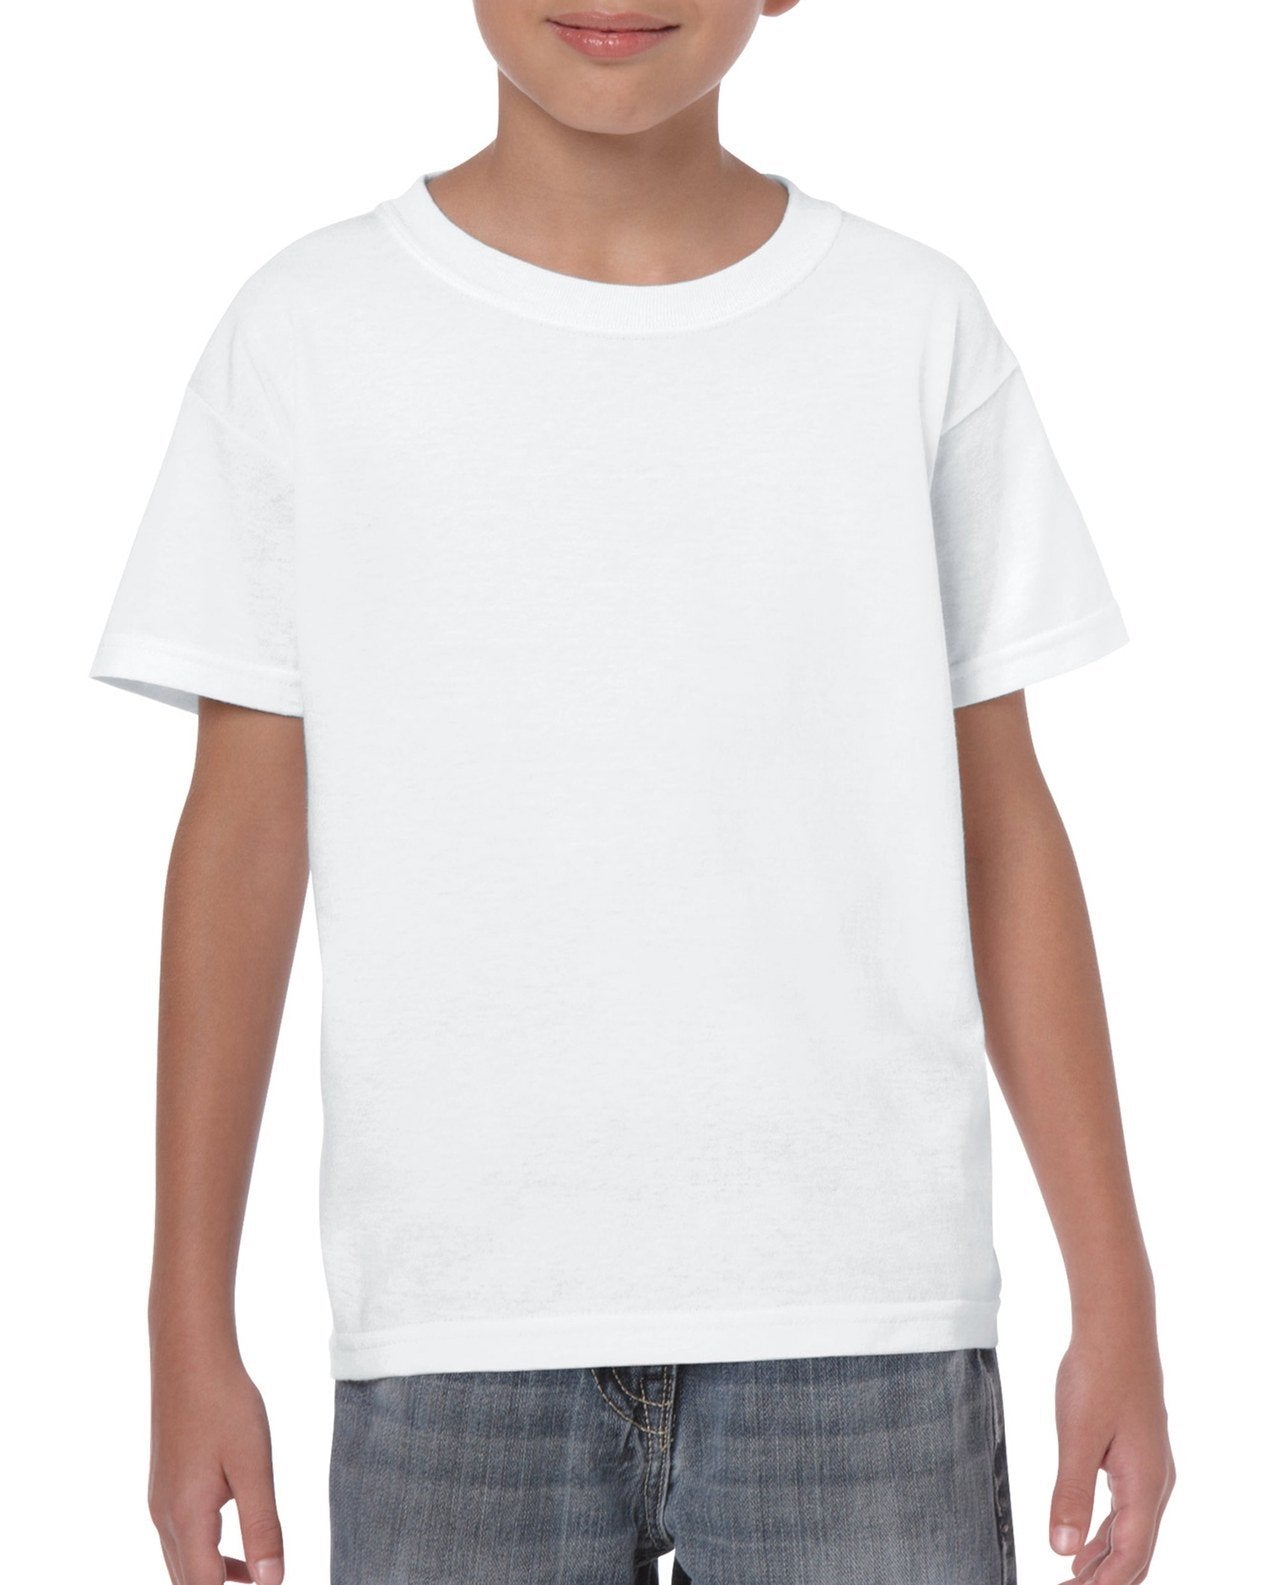 Youth Heavy Cotton T-Shirt, Style G5000B, 2-Pack